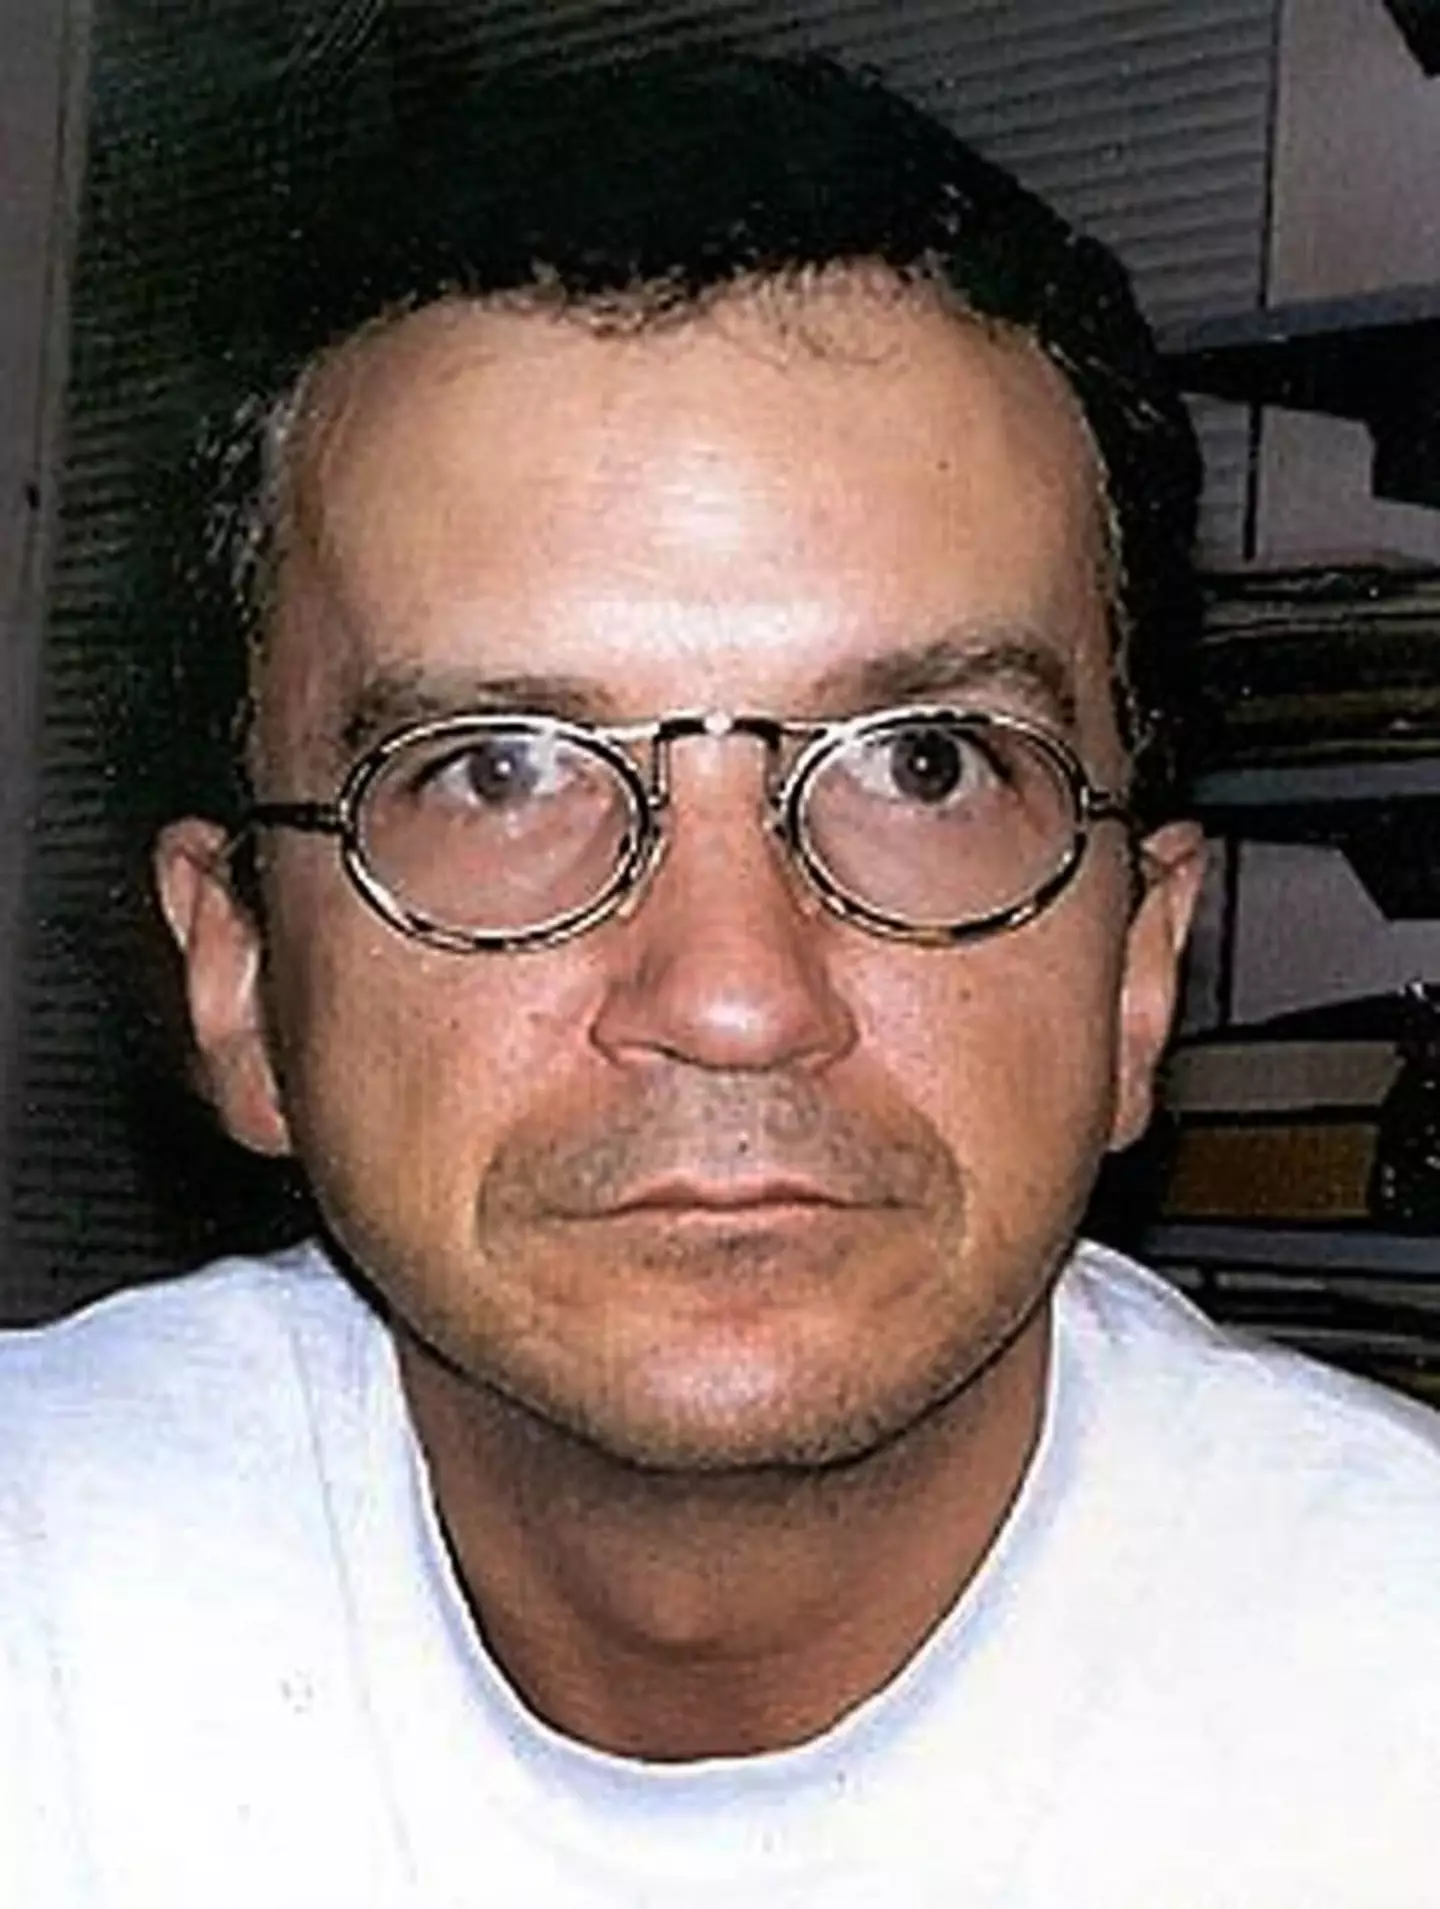 In 2001, Bernd Brandes (pictured) responded to Meiwes' advert and visited a location in Rotenburg.